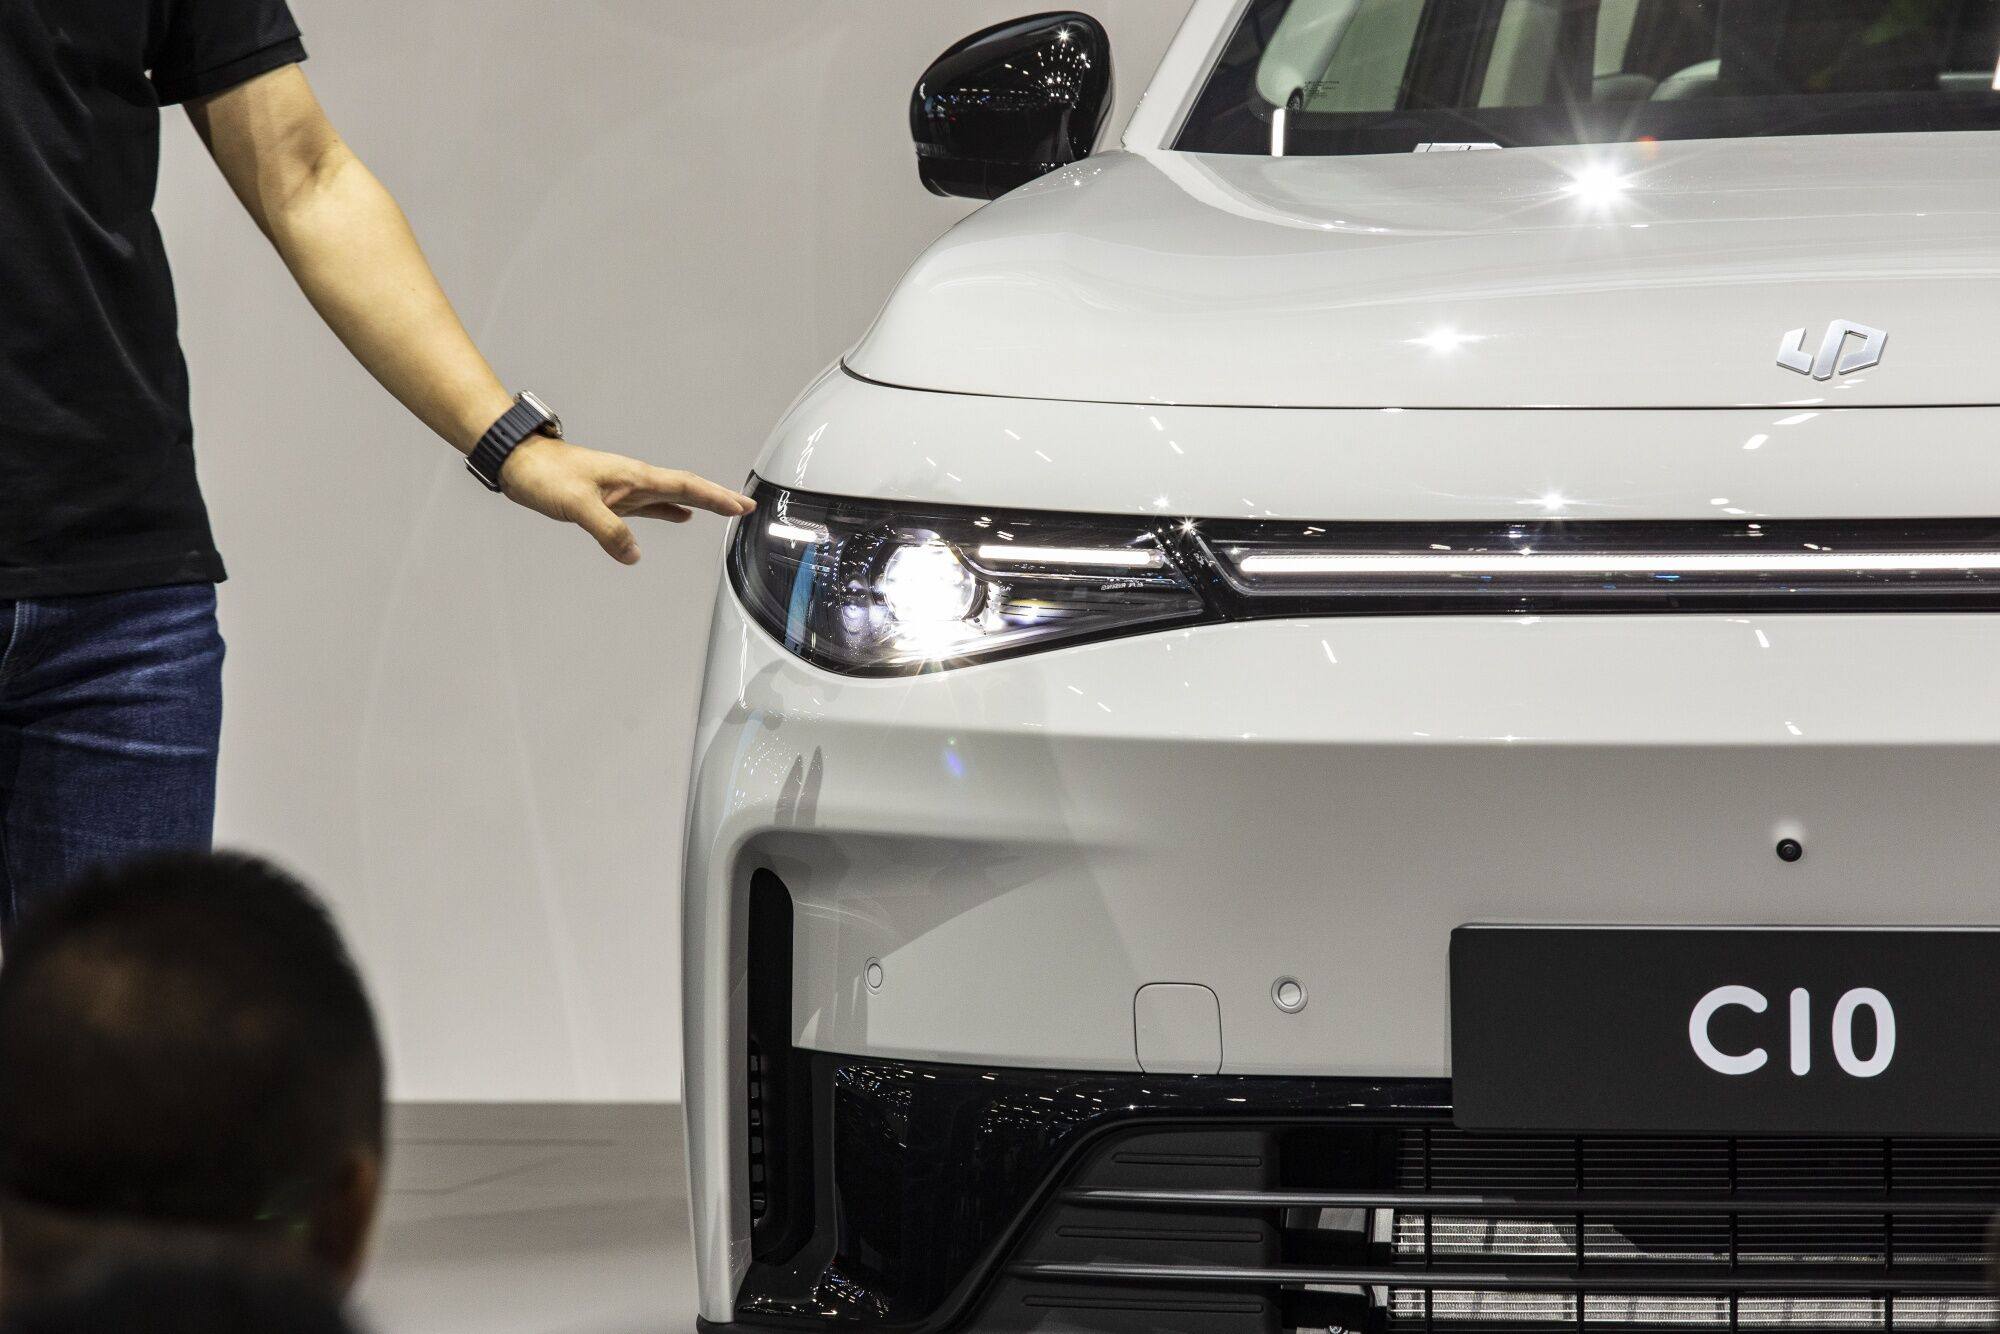 Leapmotor has joined the EV price war in China, pricing its C10 SUV at sharply lower prices than originally planned. Photo: Bloomberg